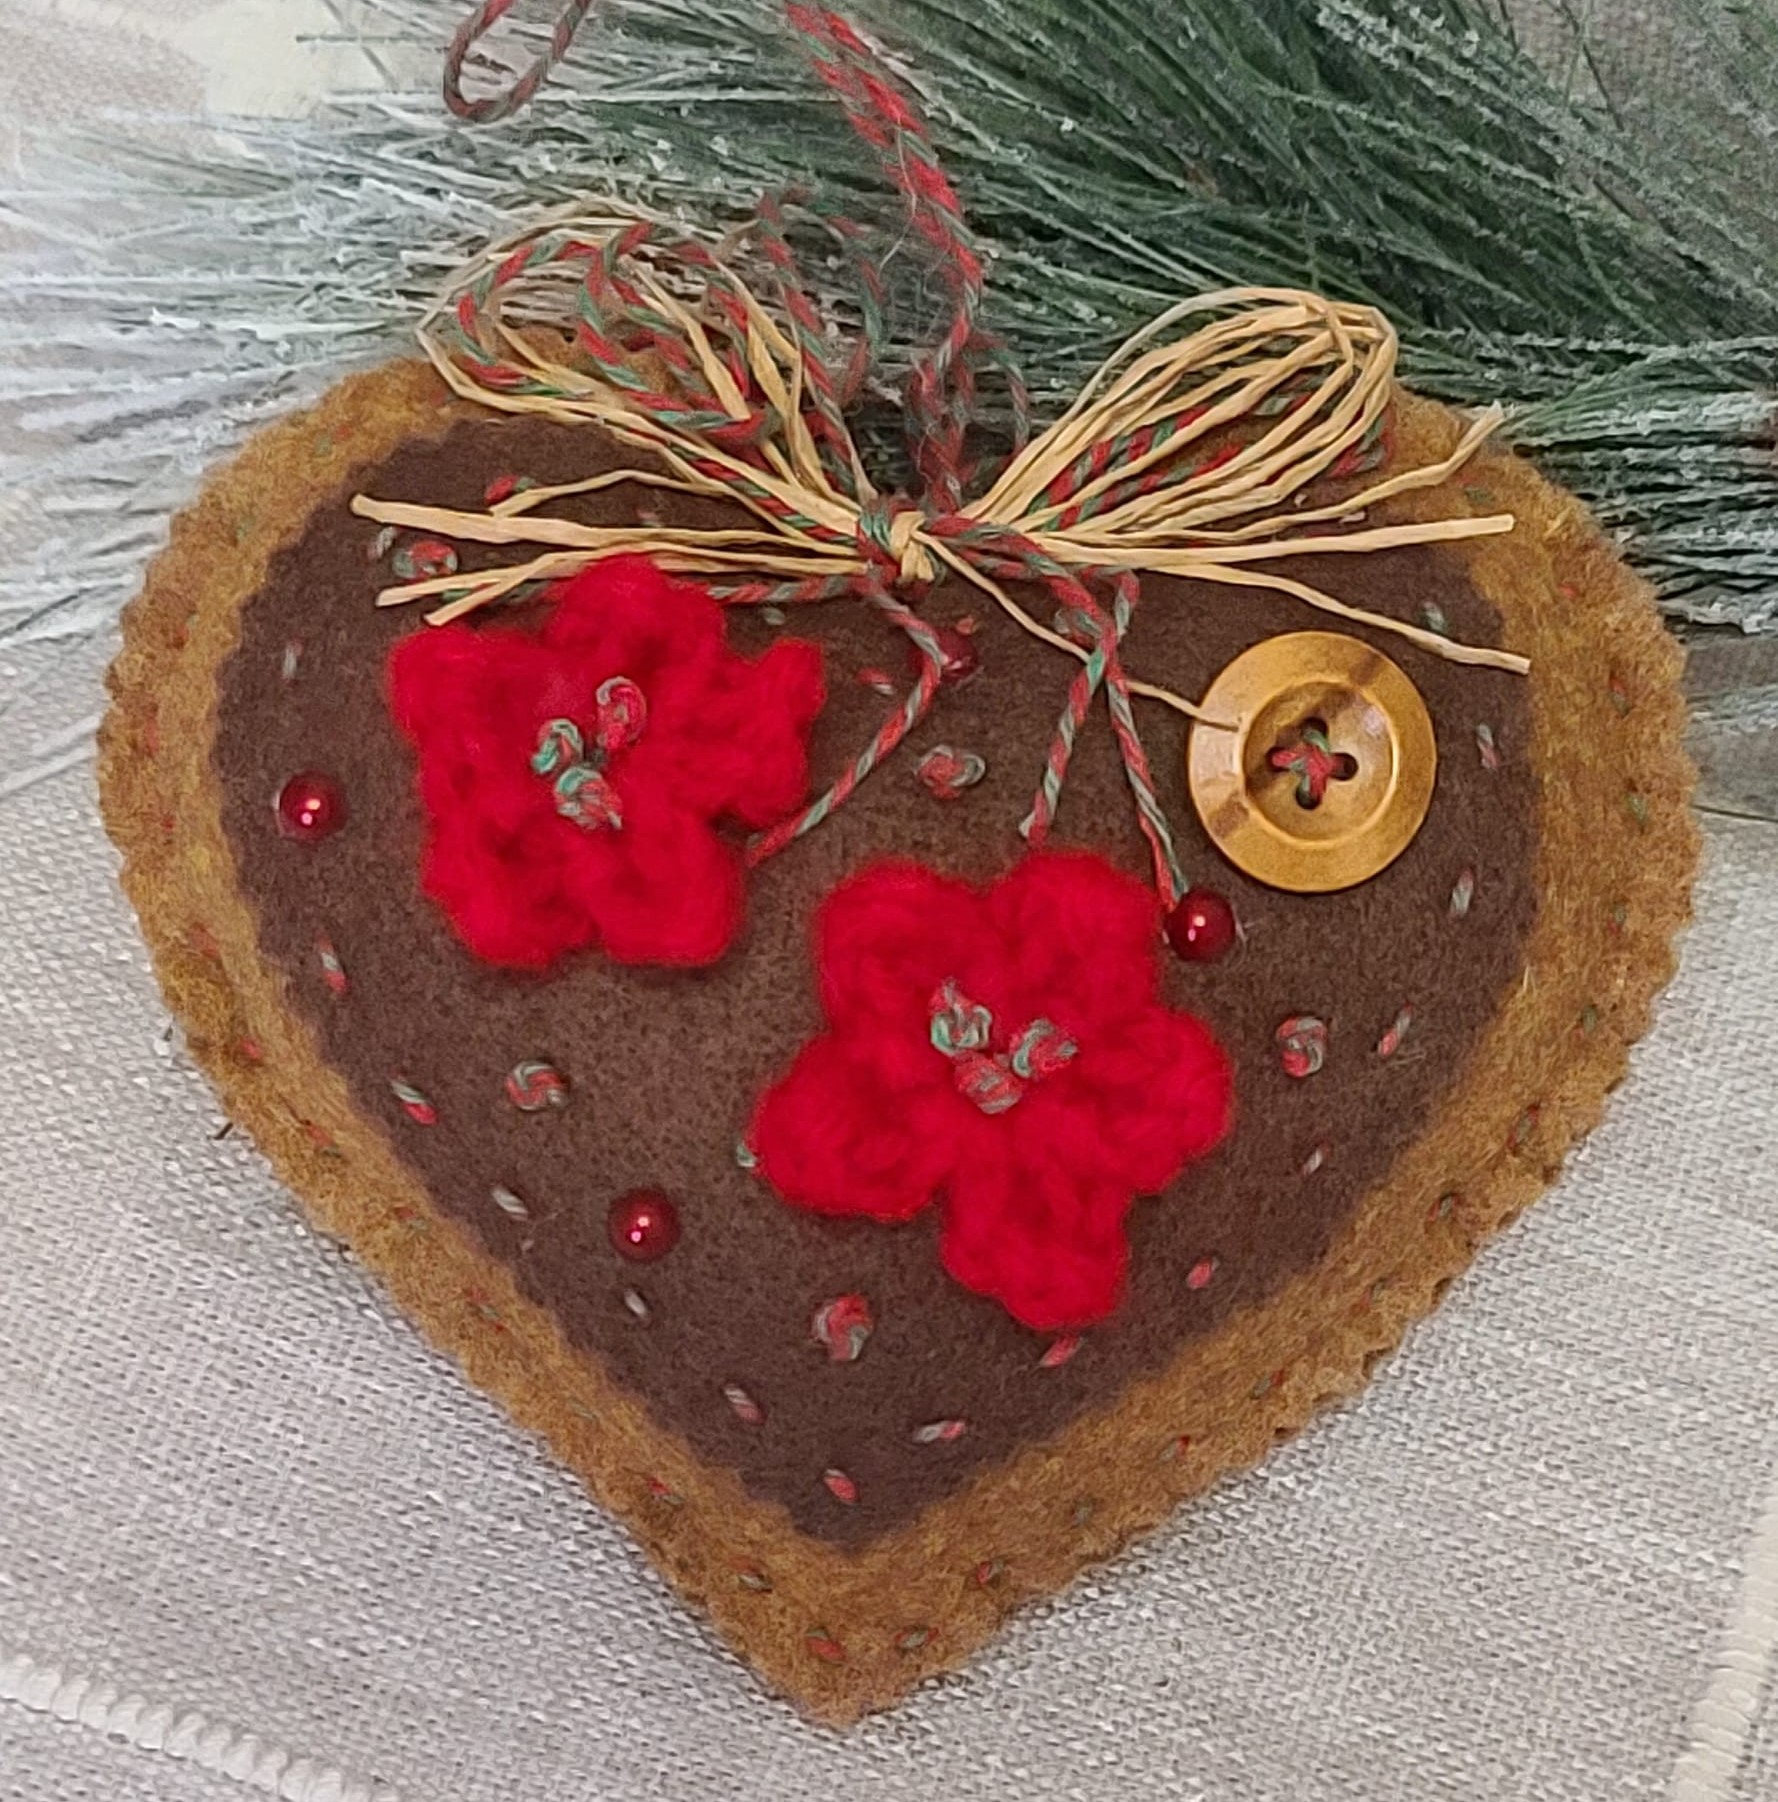 Gingerbread and chocolate icing with red accents heart ornament